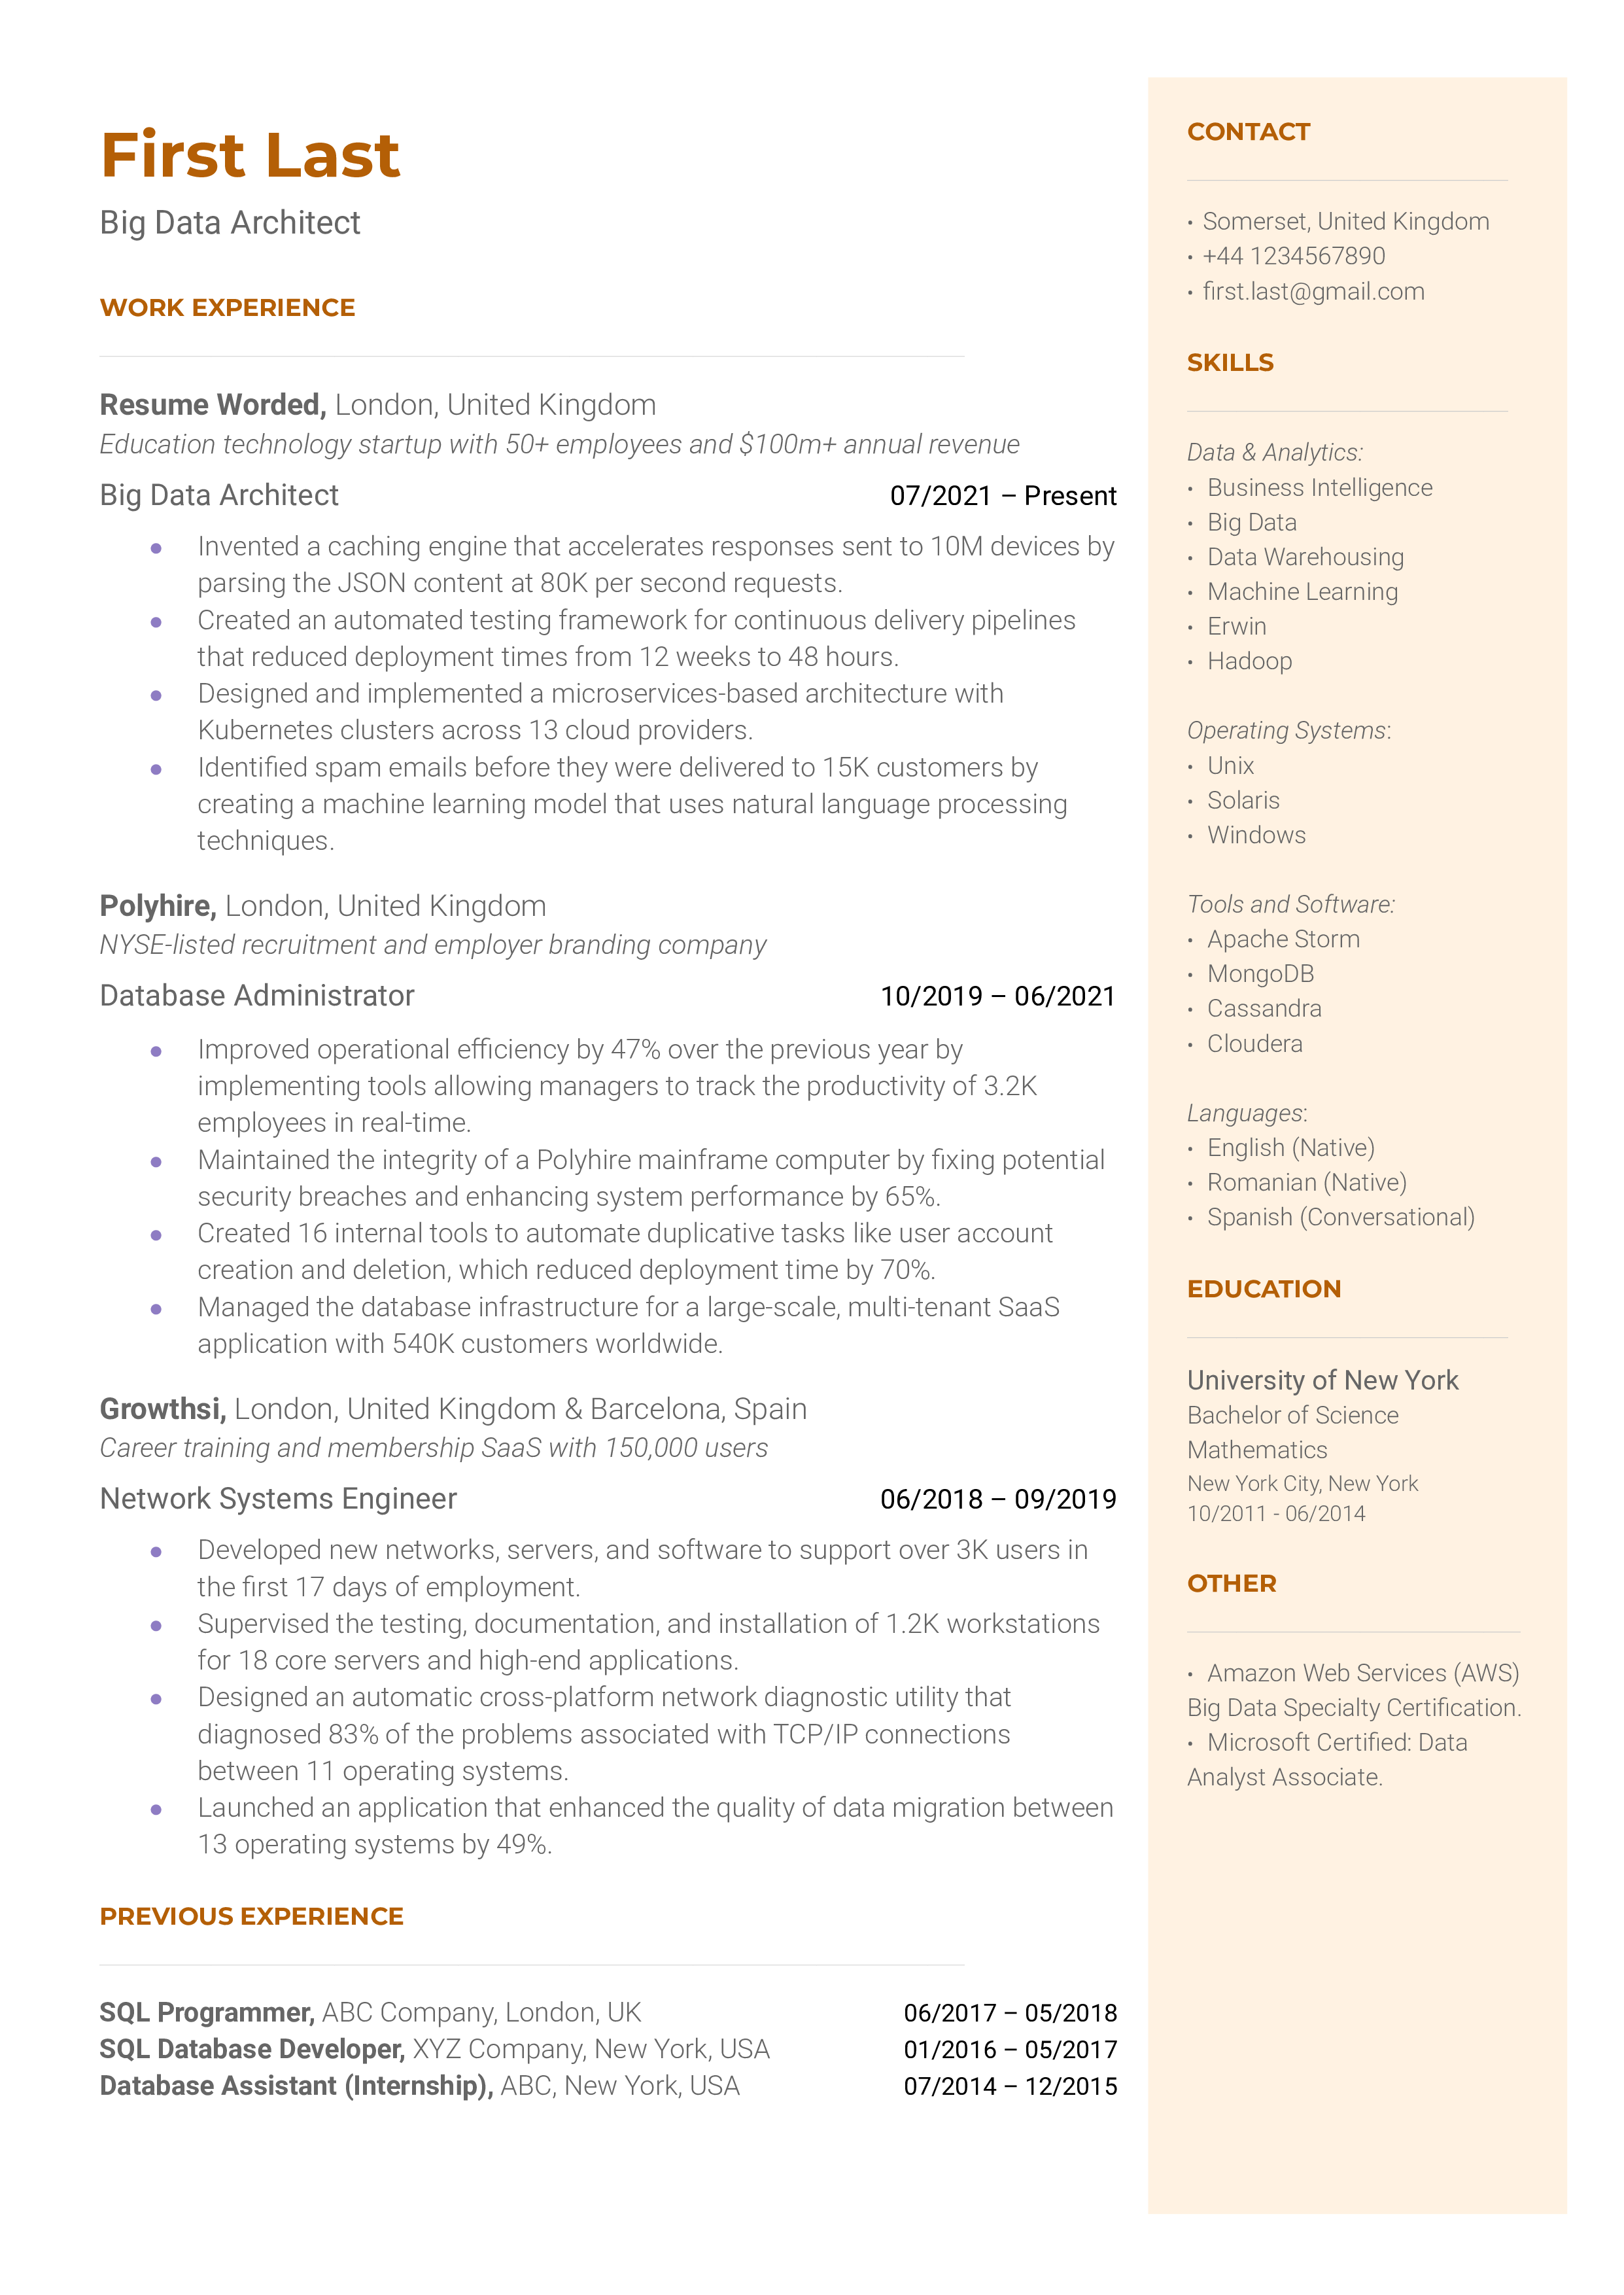 A big data architect resume example that implements strong action verbs